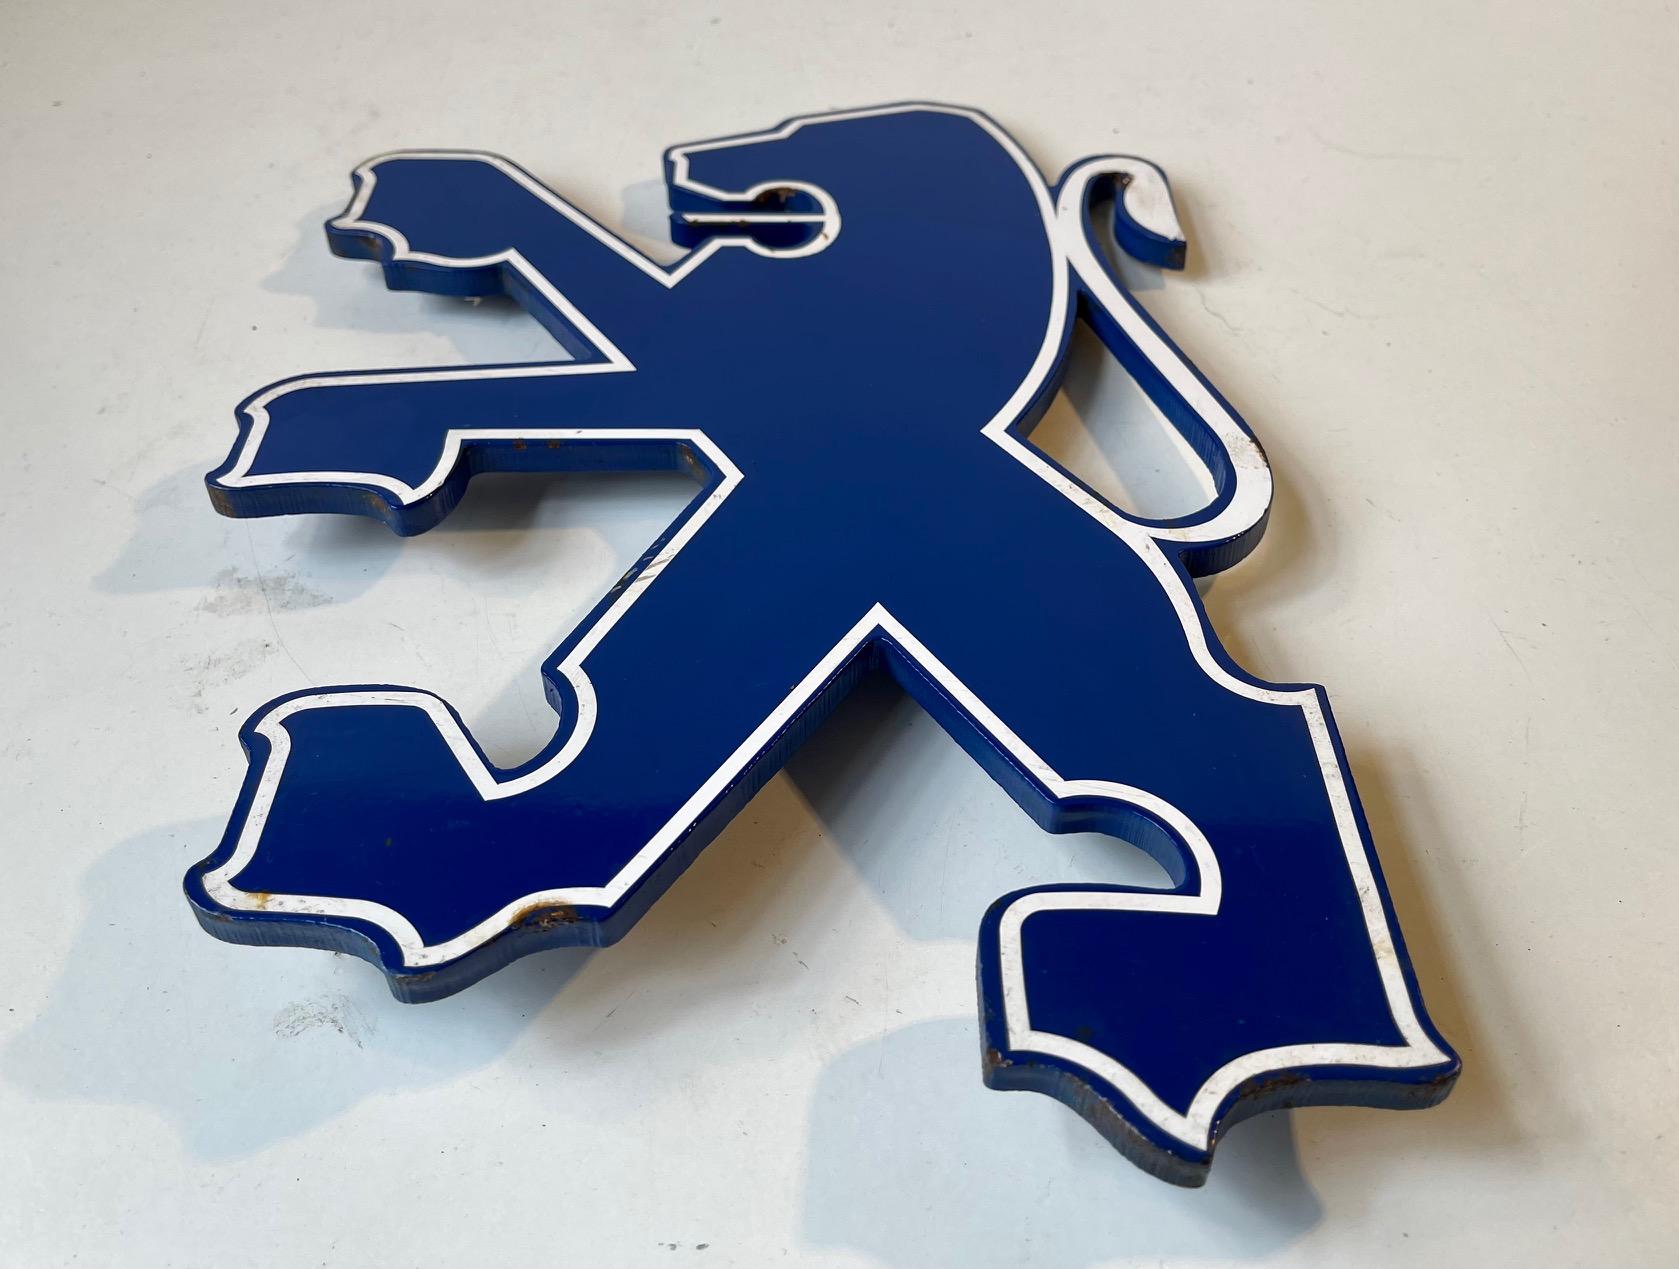 A 1990s lion logo for a Peugeot Dealership. Its made from enameled thick steel (1 cm) highlighted by a white acrylic band. Weight circa 3 kg's. Measurements: height: 31.5 cm, width: 21.5 cm.